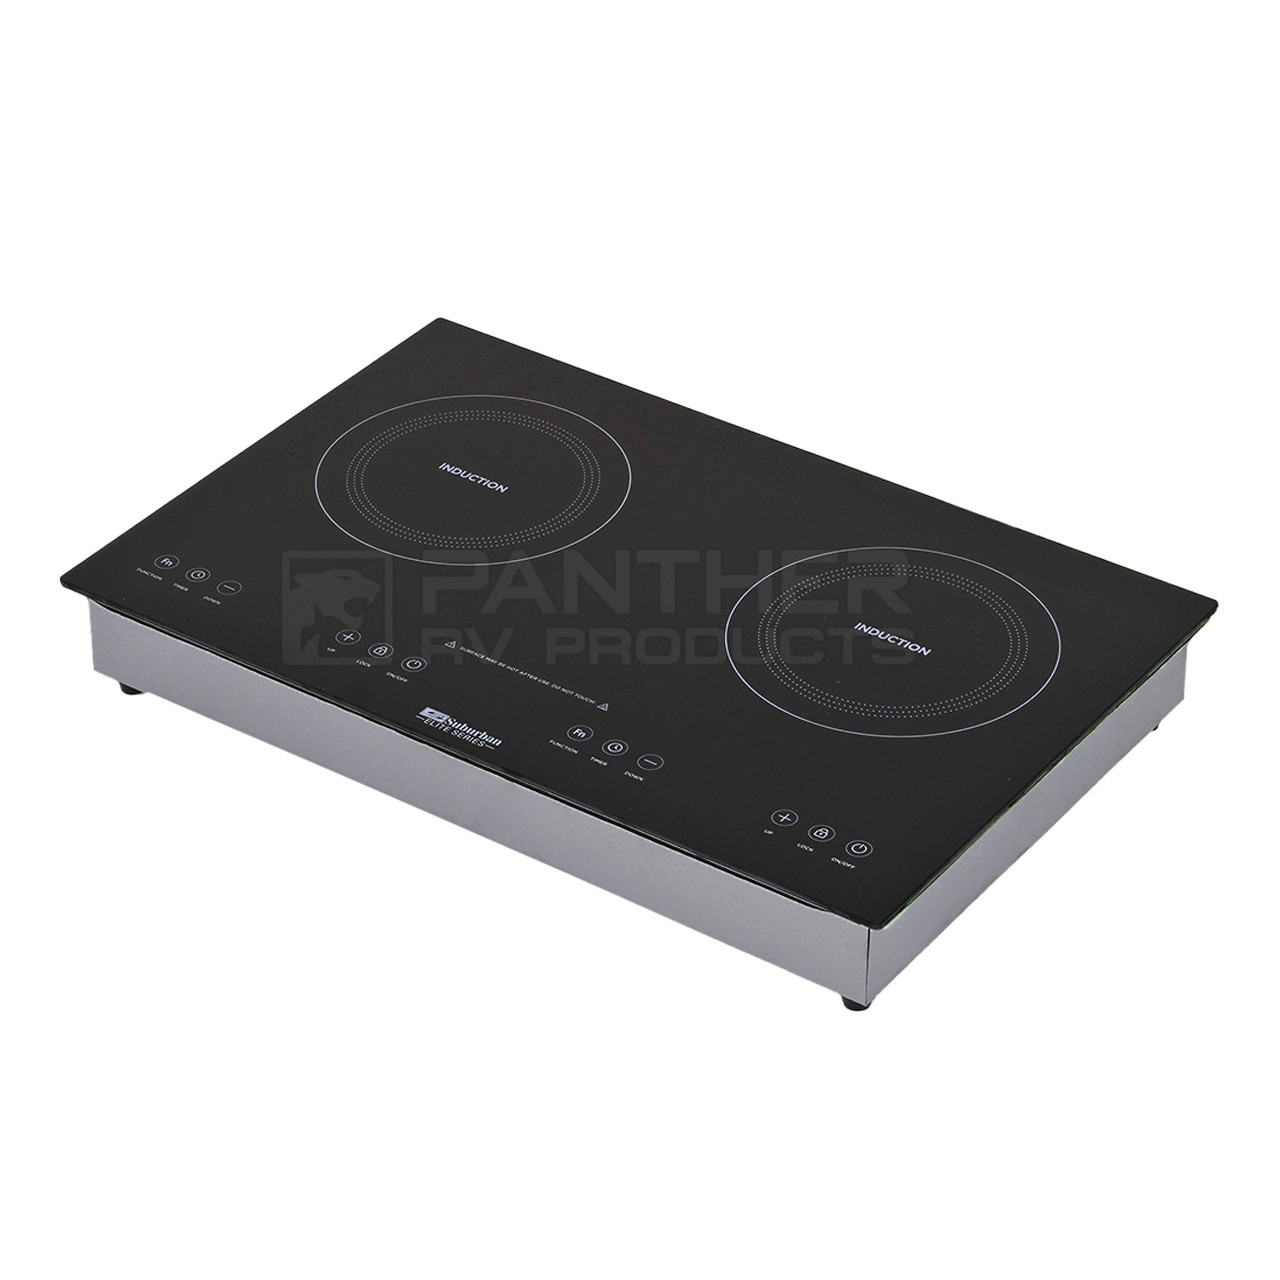 Suburban 3309A RV Double Element Induction Cooktop